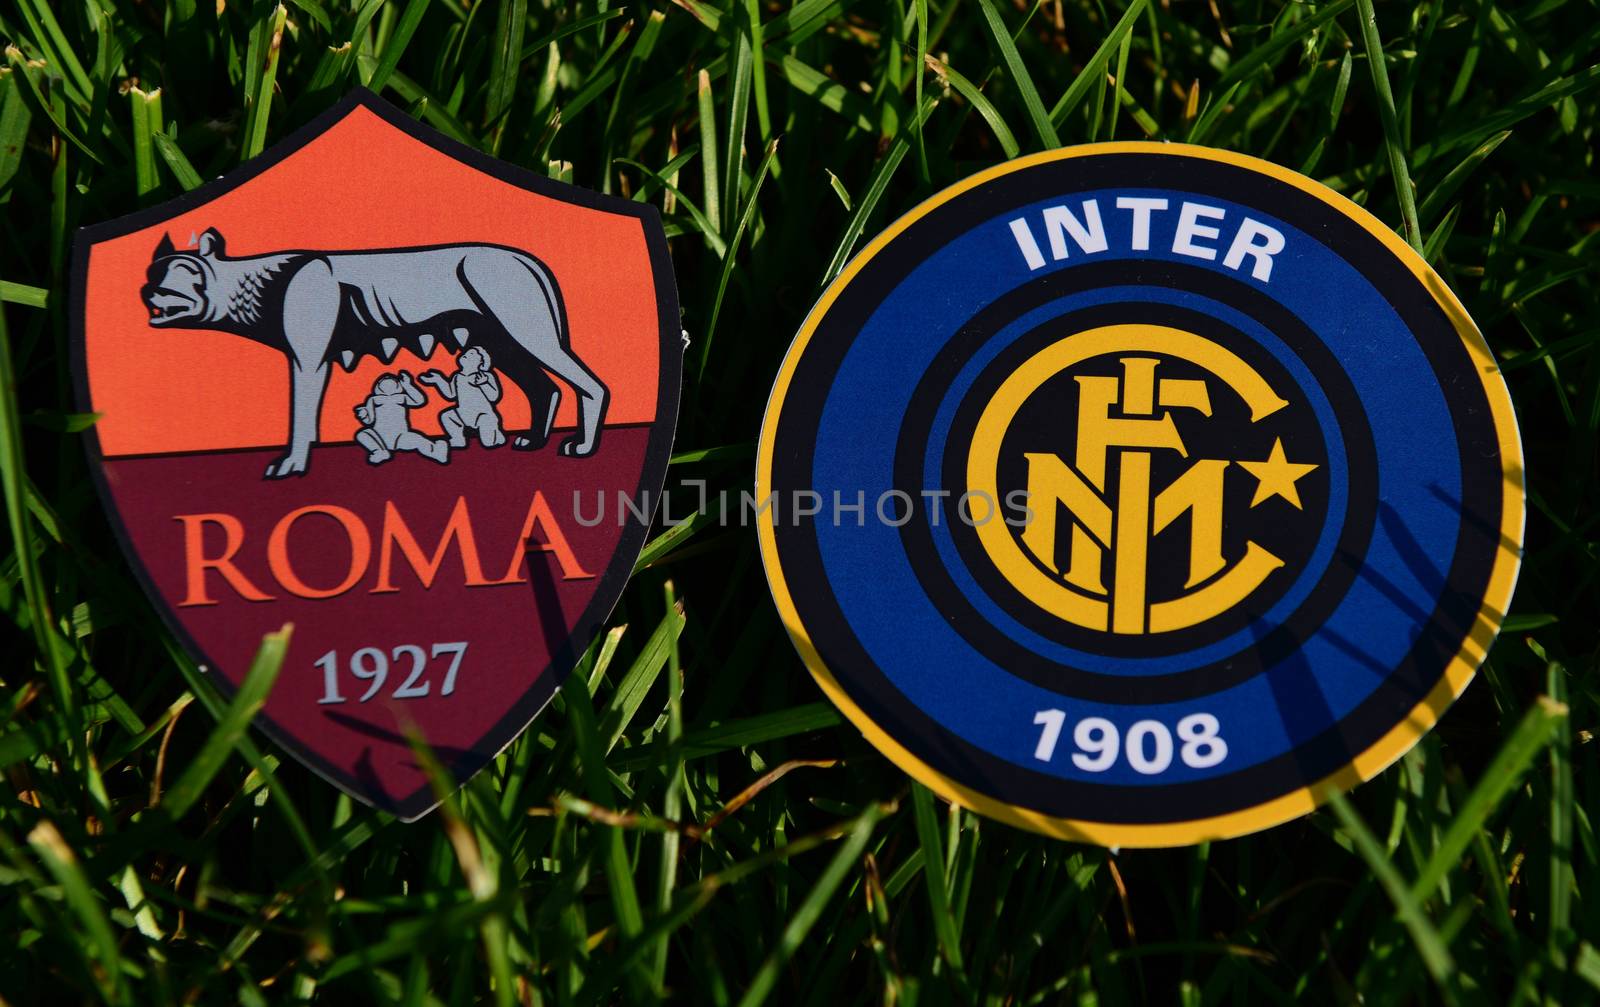 September 6, 2019, Turin, Italy. Emblems of Italian football clubs Roma and Internazionale on the green grass of the lawn.